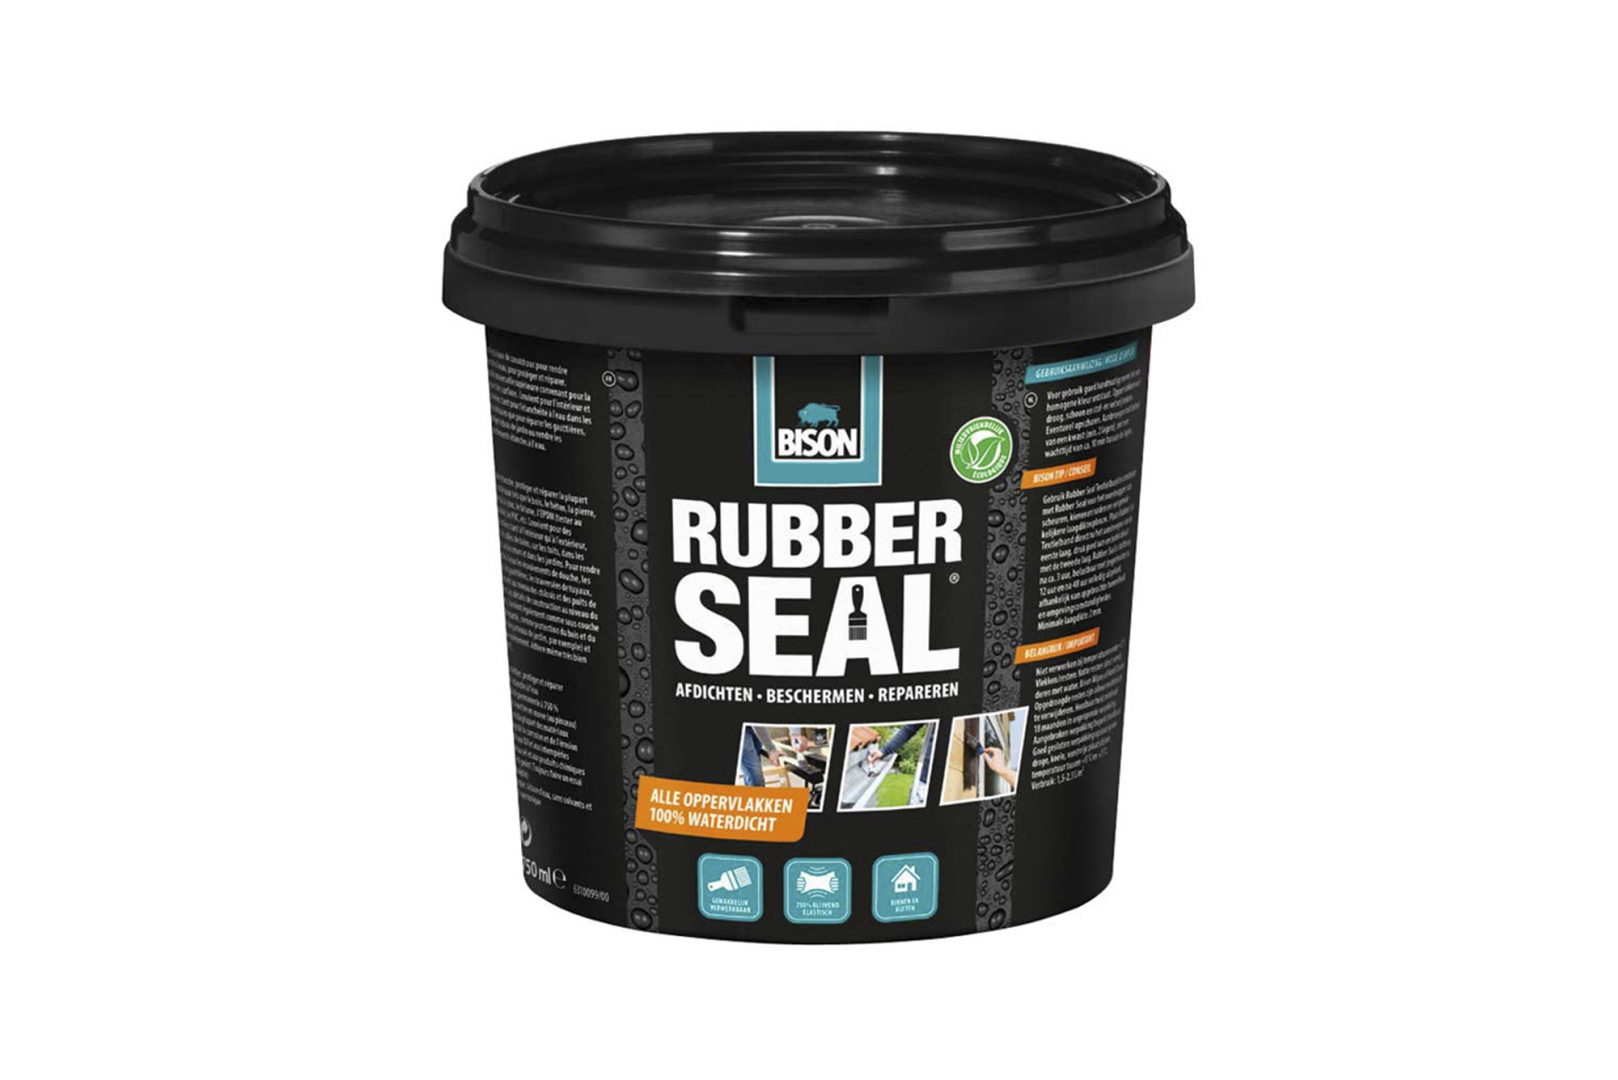 Bison rubberseal 750 ml